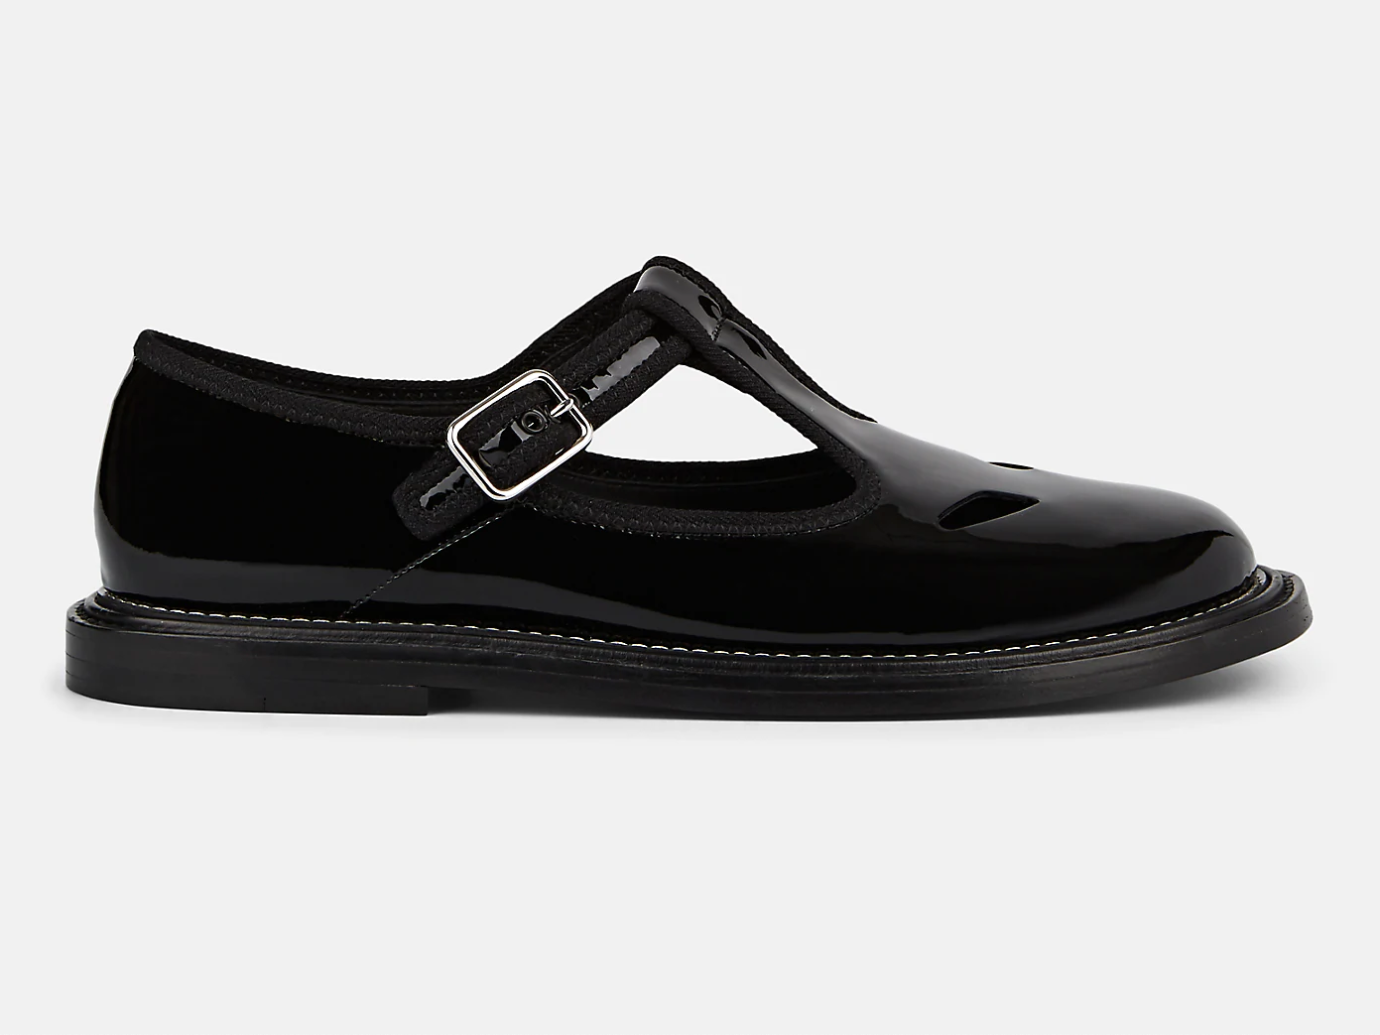 Burberry Alannis Patent Leather Mary Jane Flats